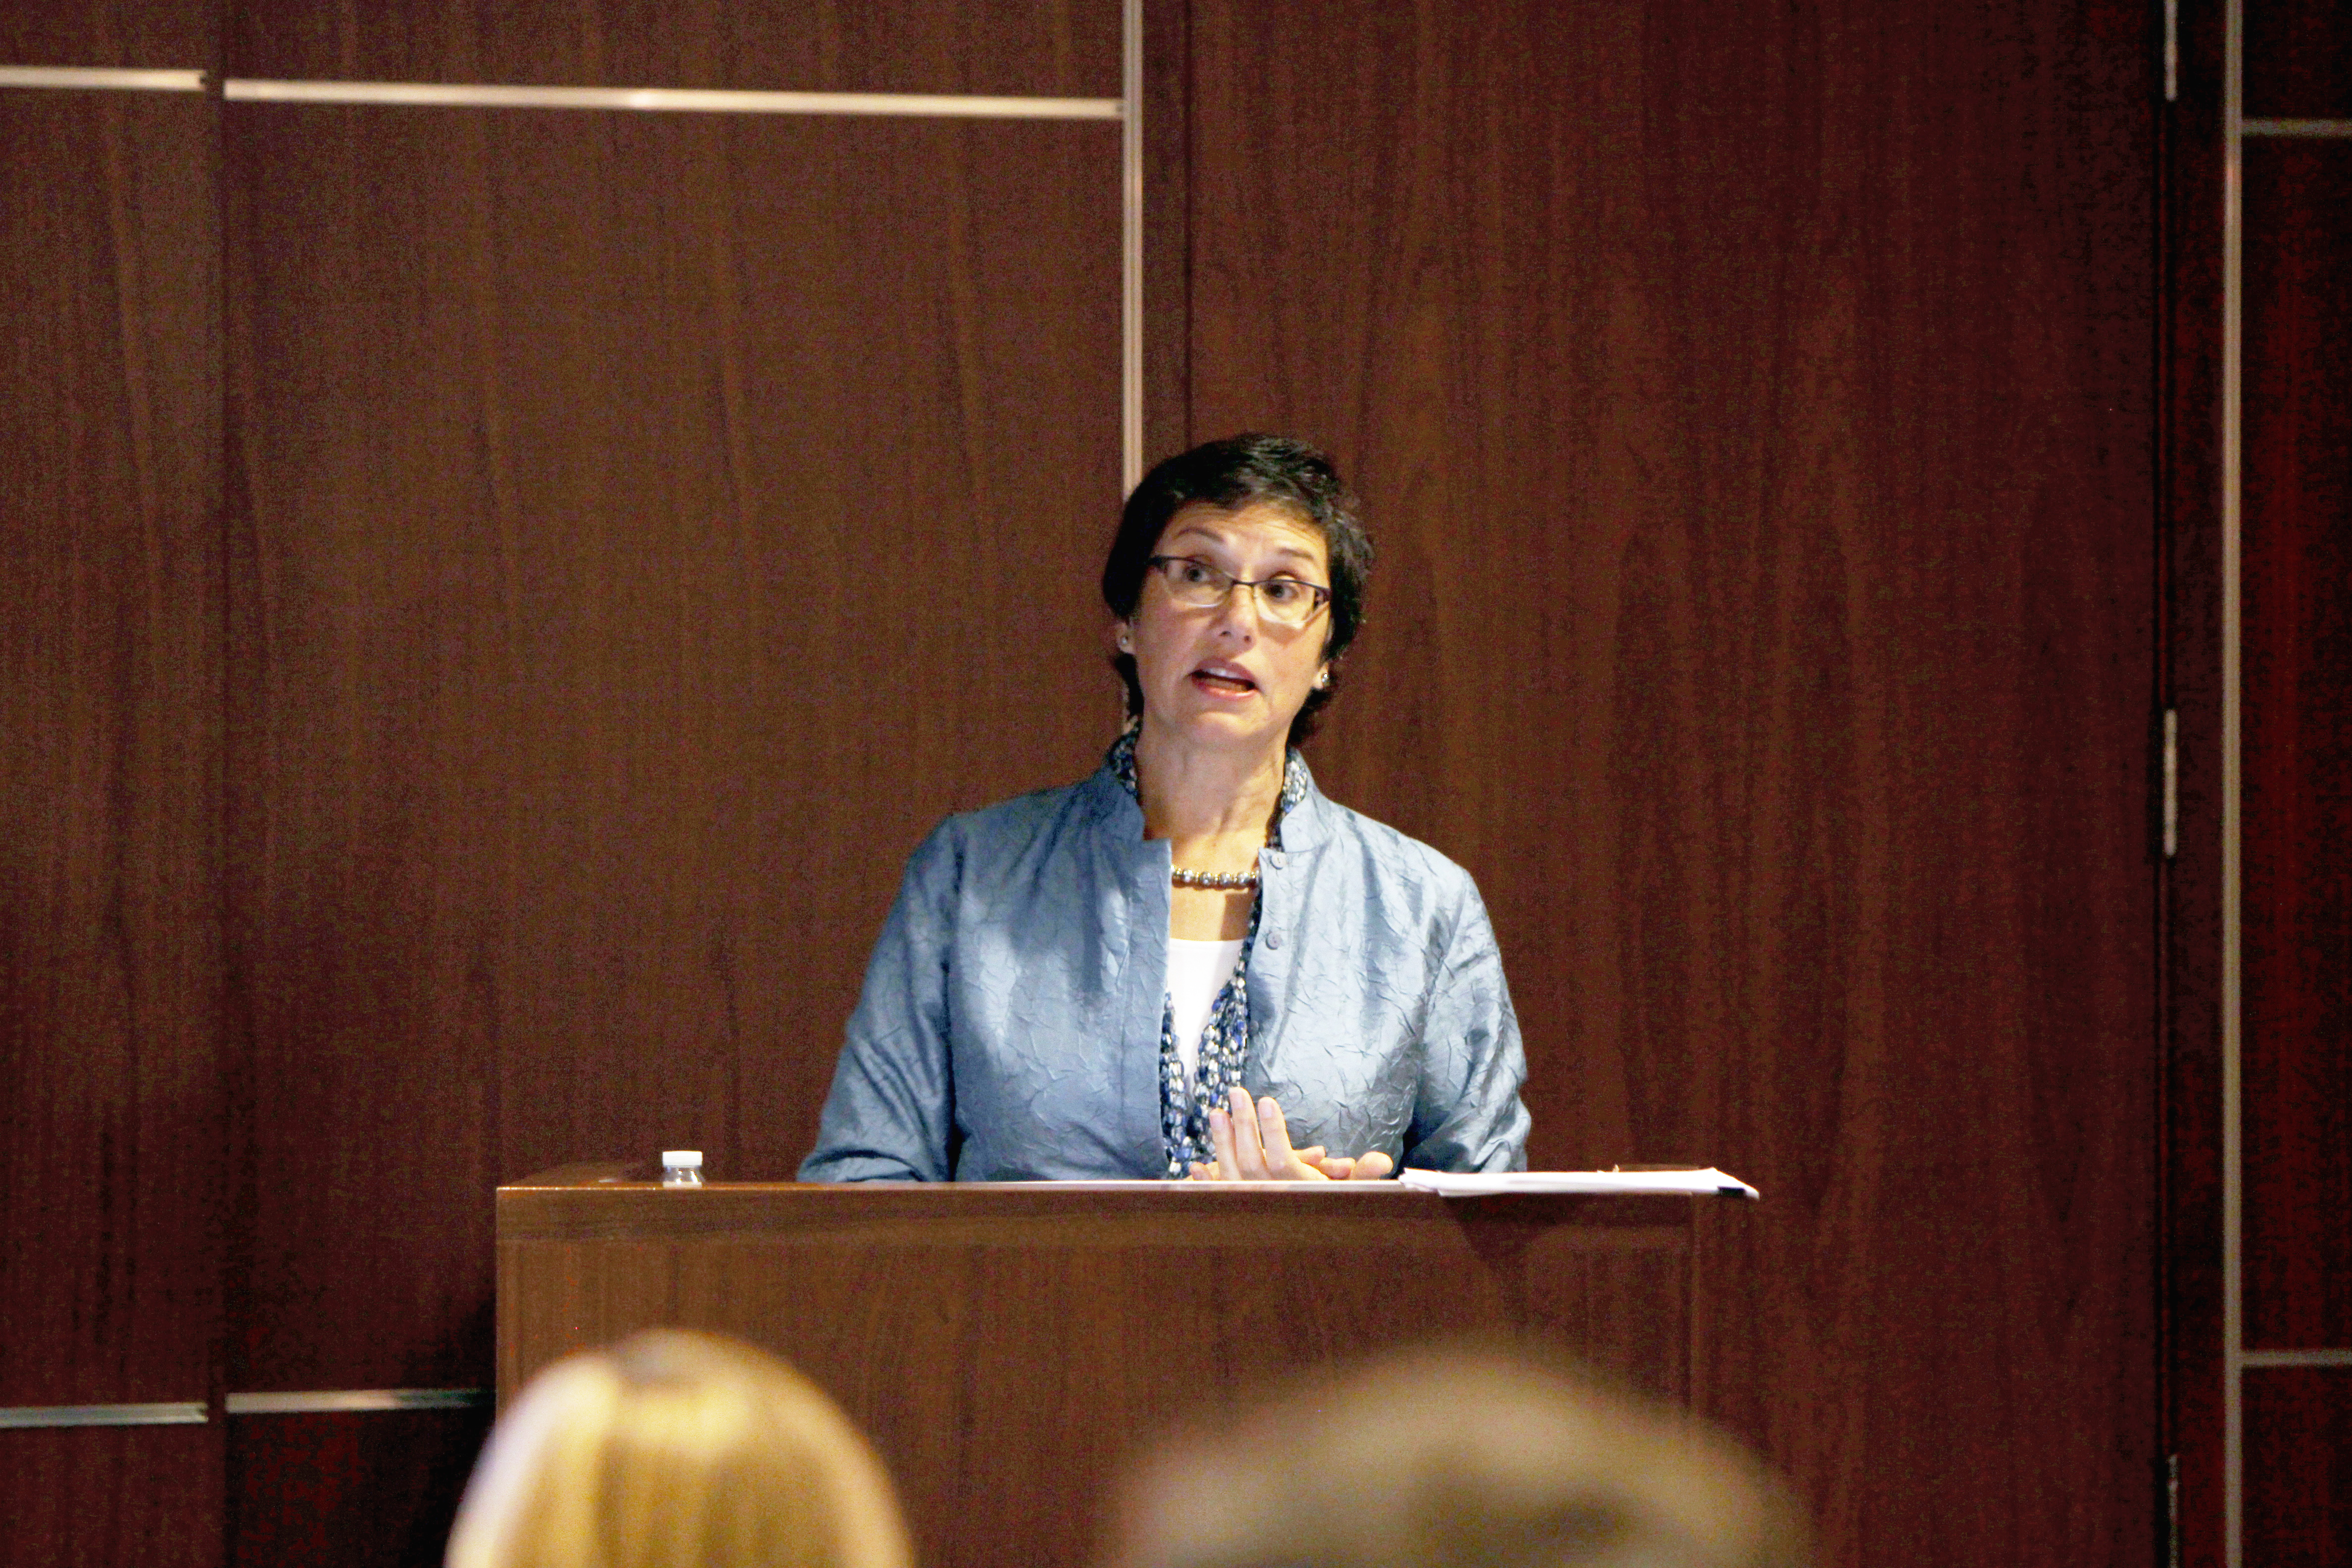 Erica Groshen presents at a lectern